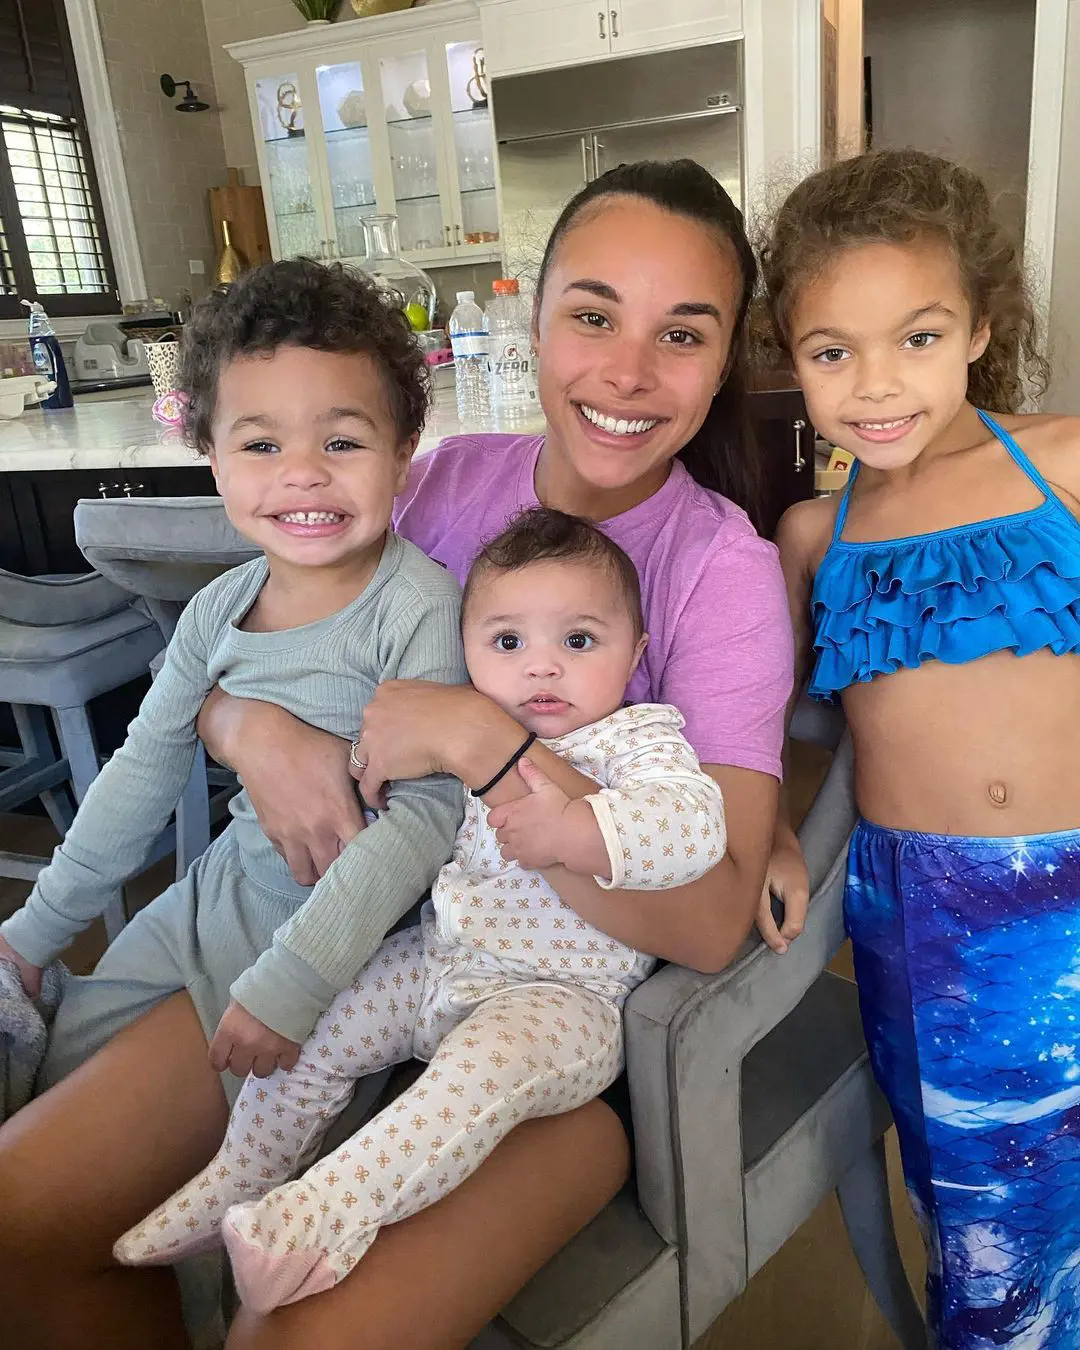 The Evans welcomed their youngest child Aliyah Nicole Evans in 2022